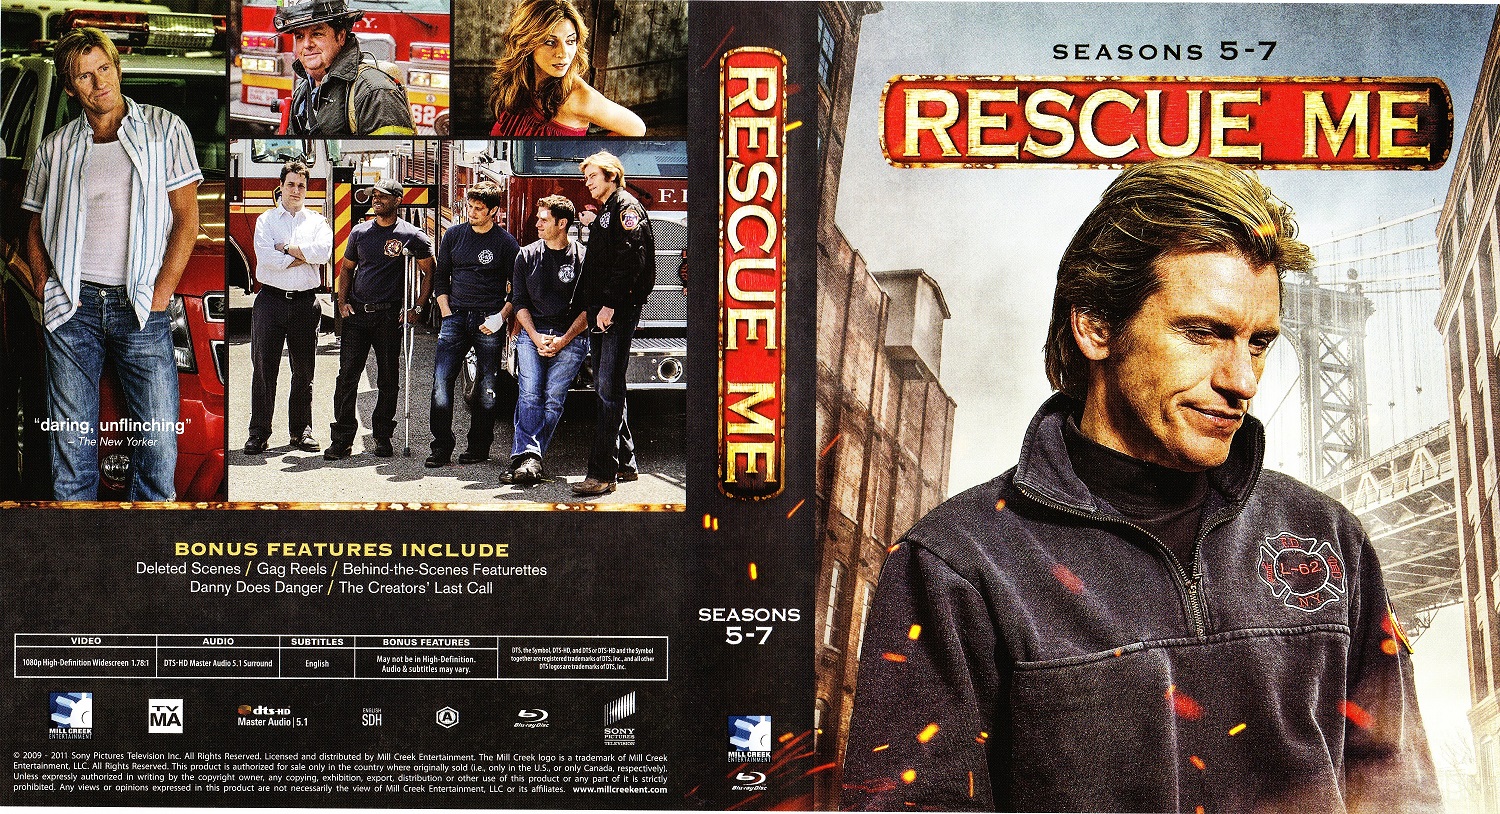 Rescue Me - Trailer - The Complete Series on Blu-ray 